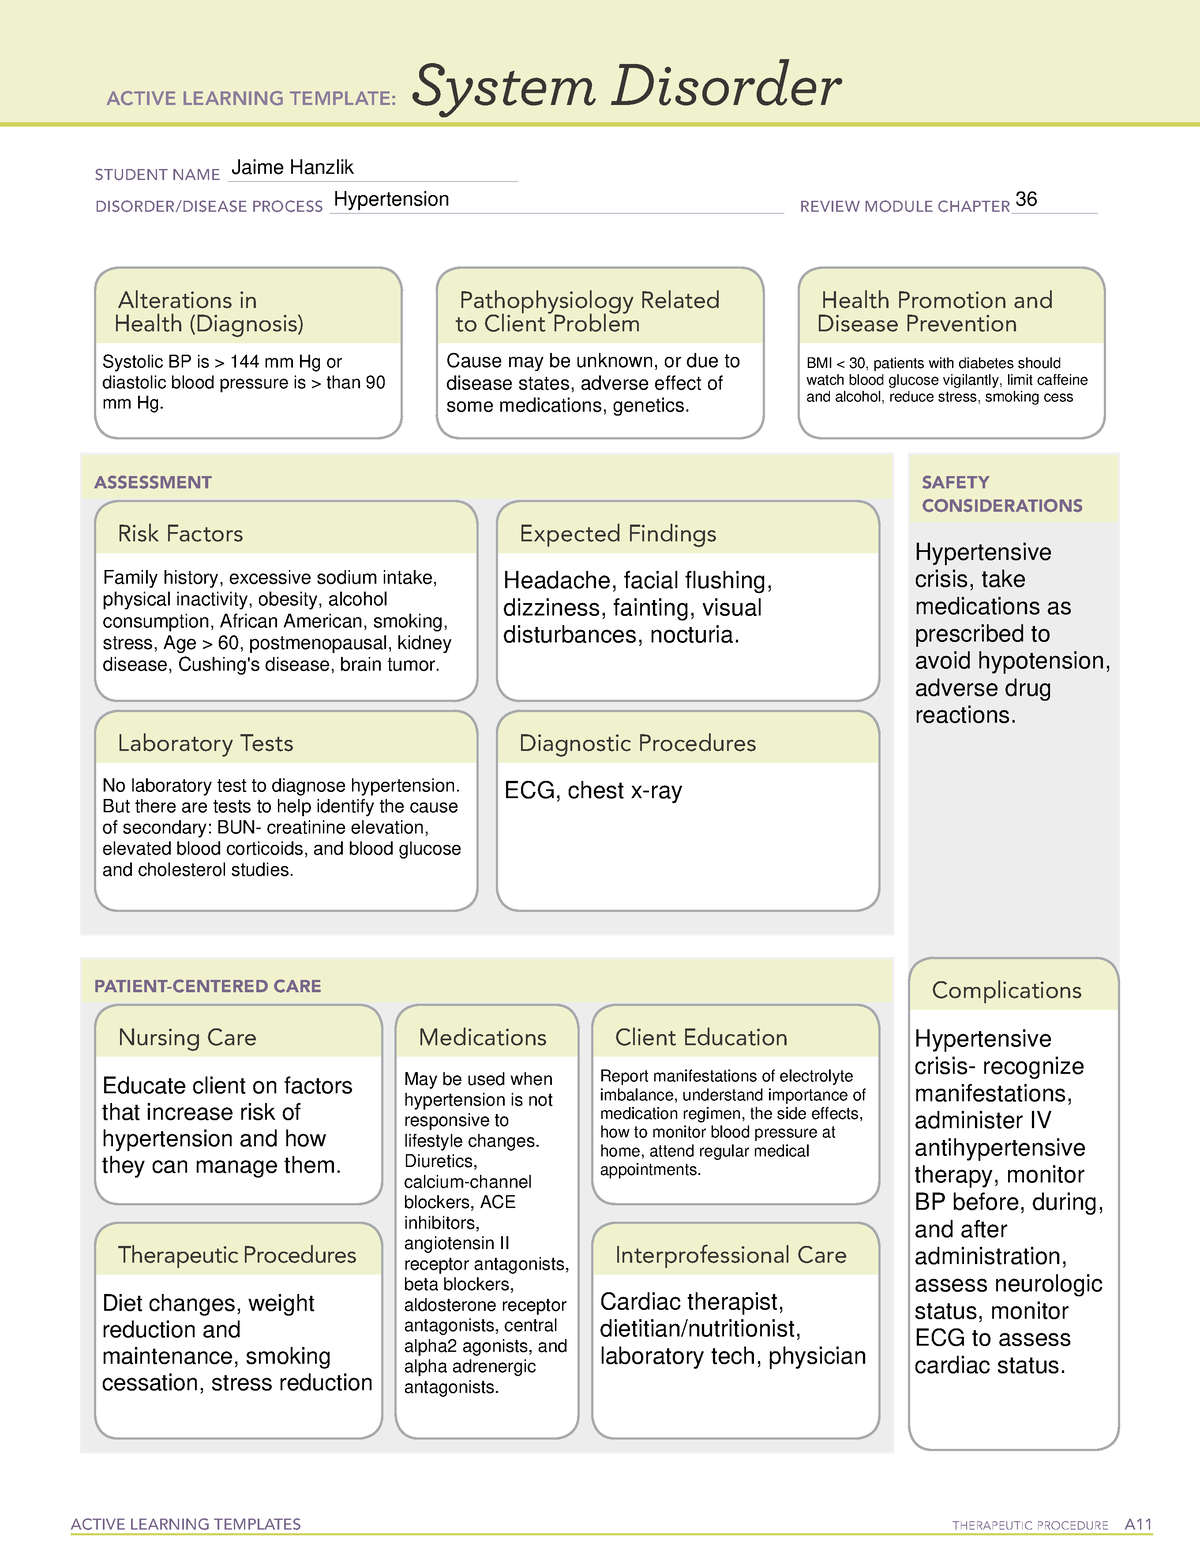 ATI System Disorder Hypertension - ACTIVE LEARNING TEMPLATES ...